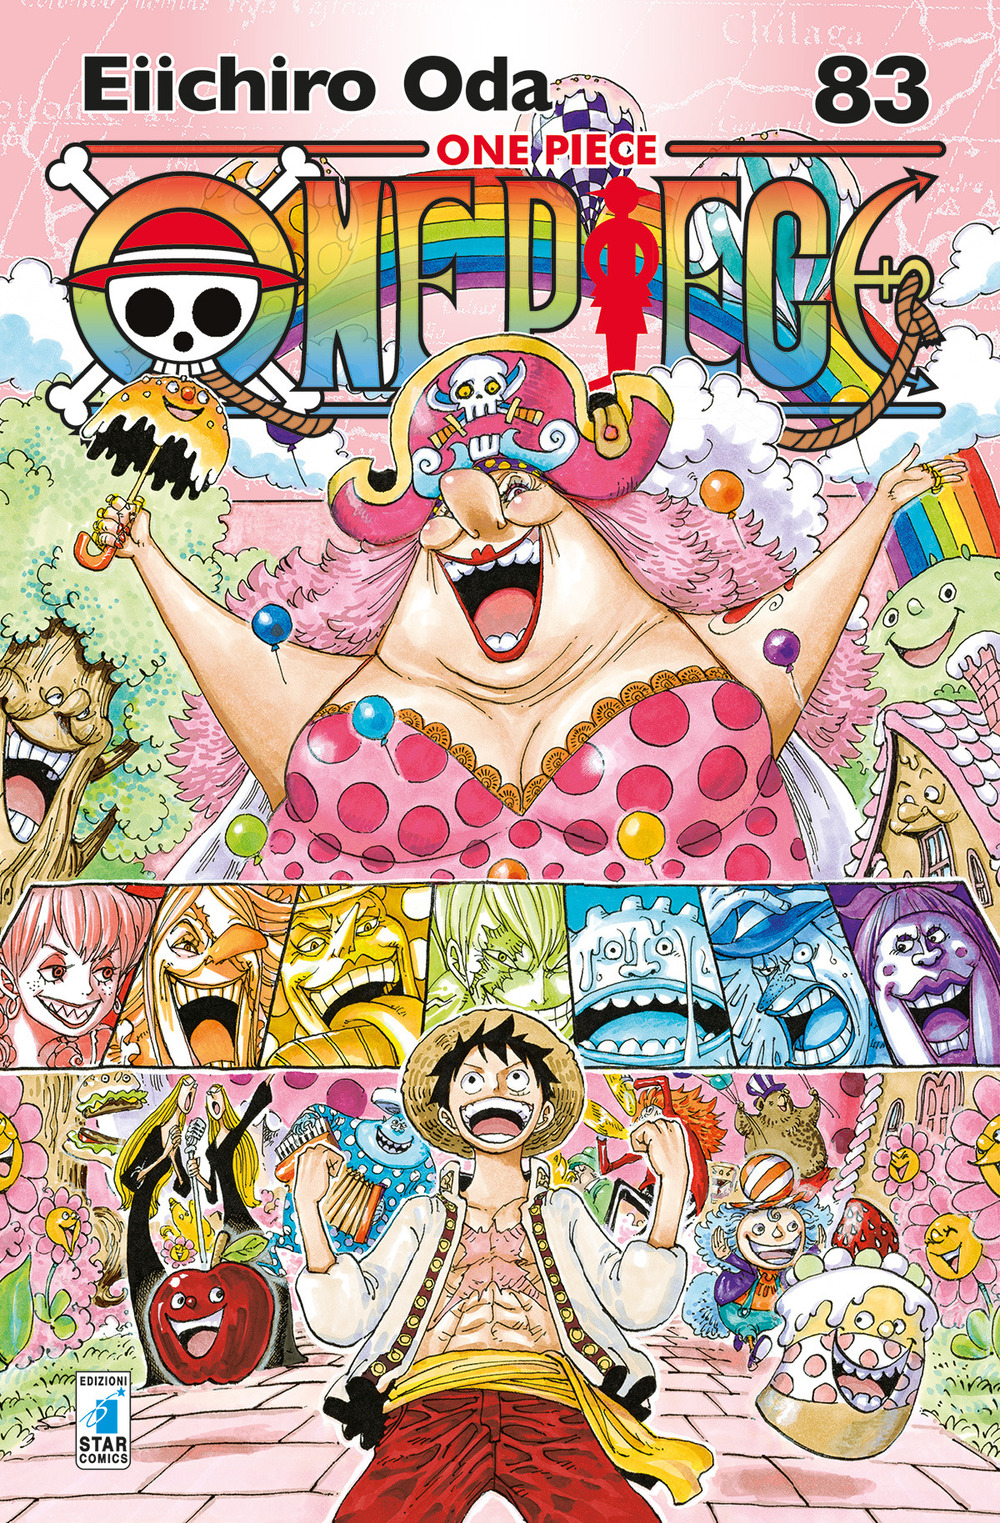 One piece. New edition. Vol. 83